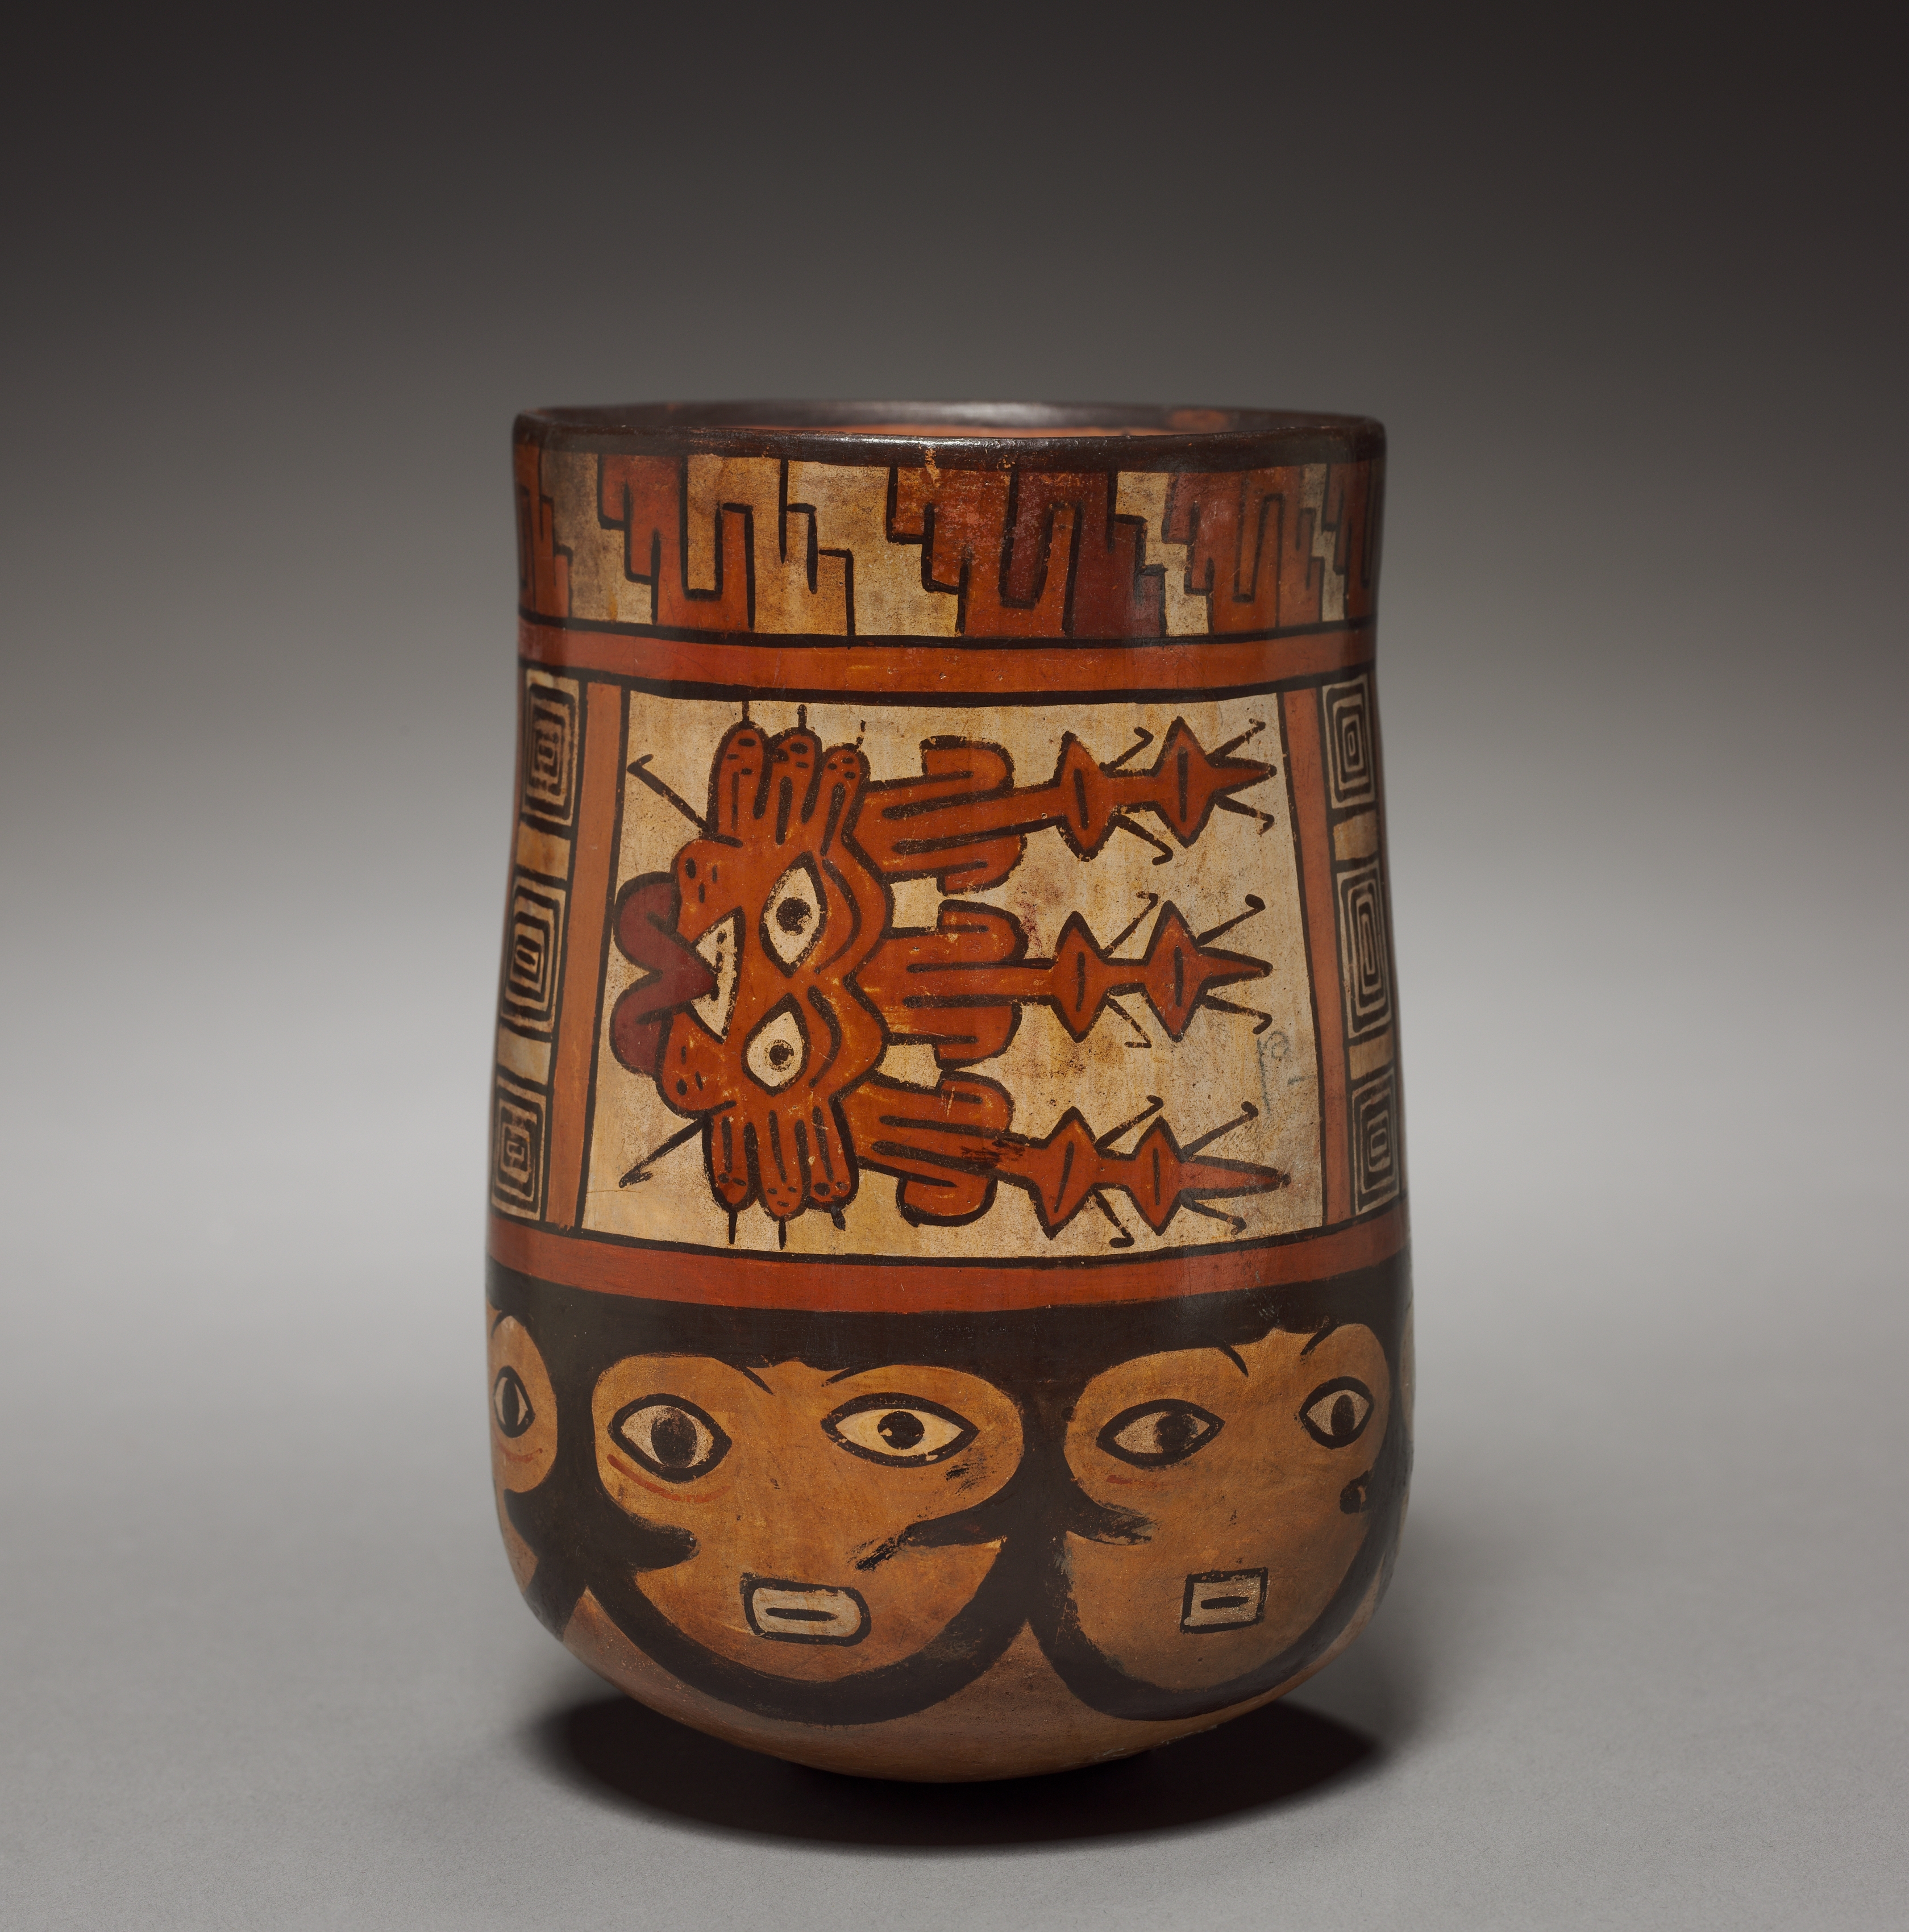 Vessel with Female Faces